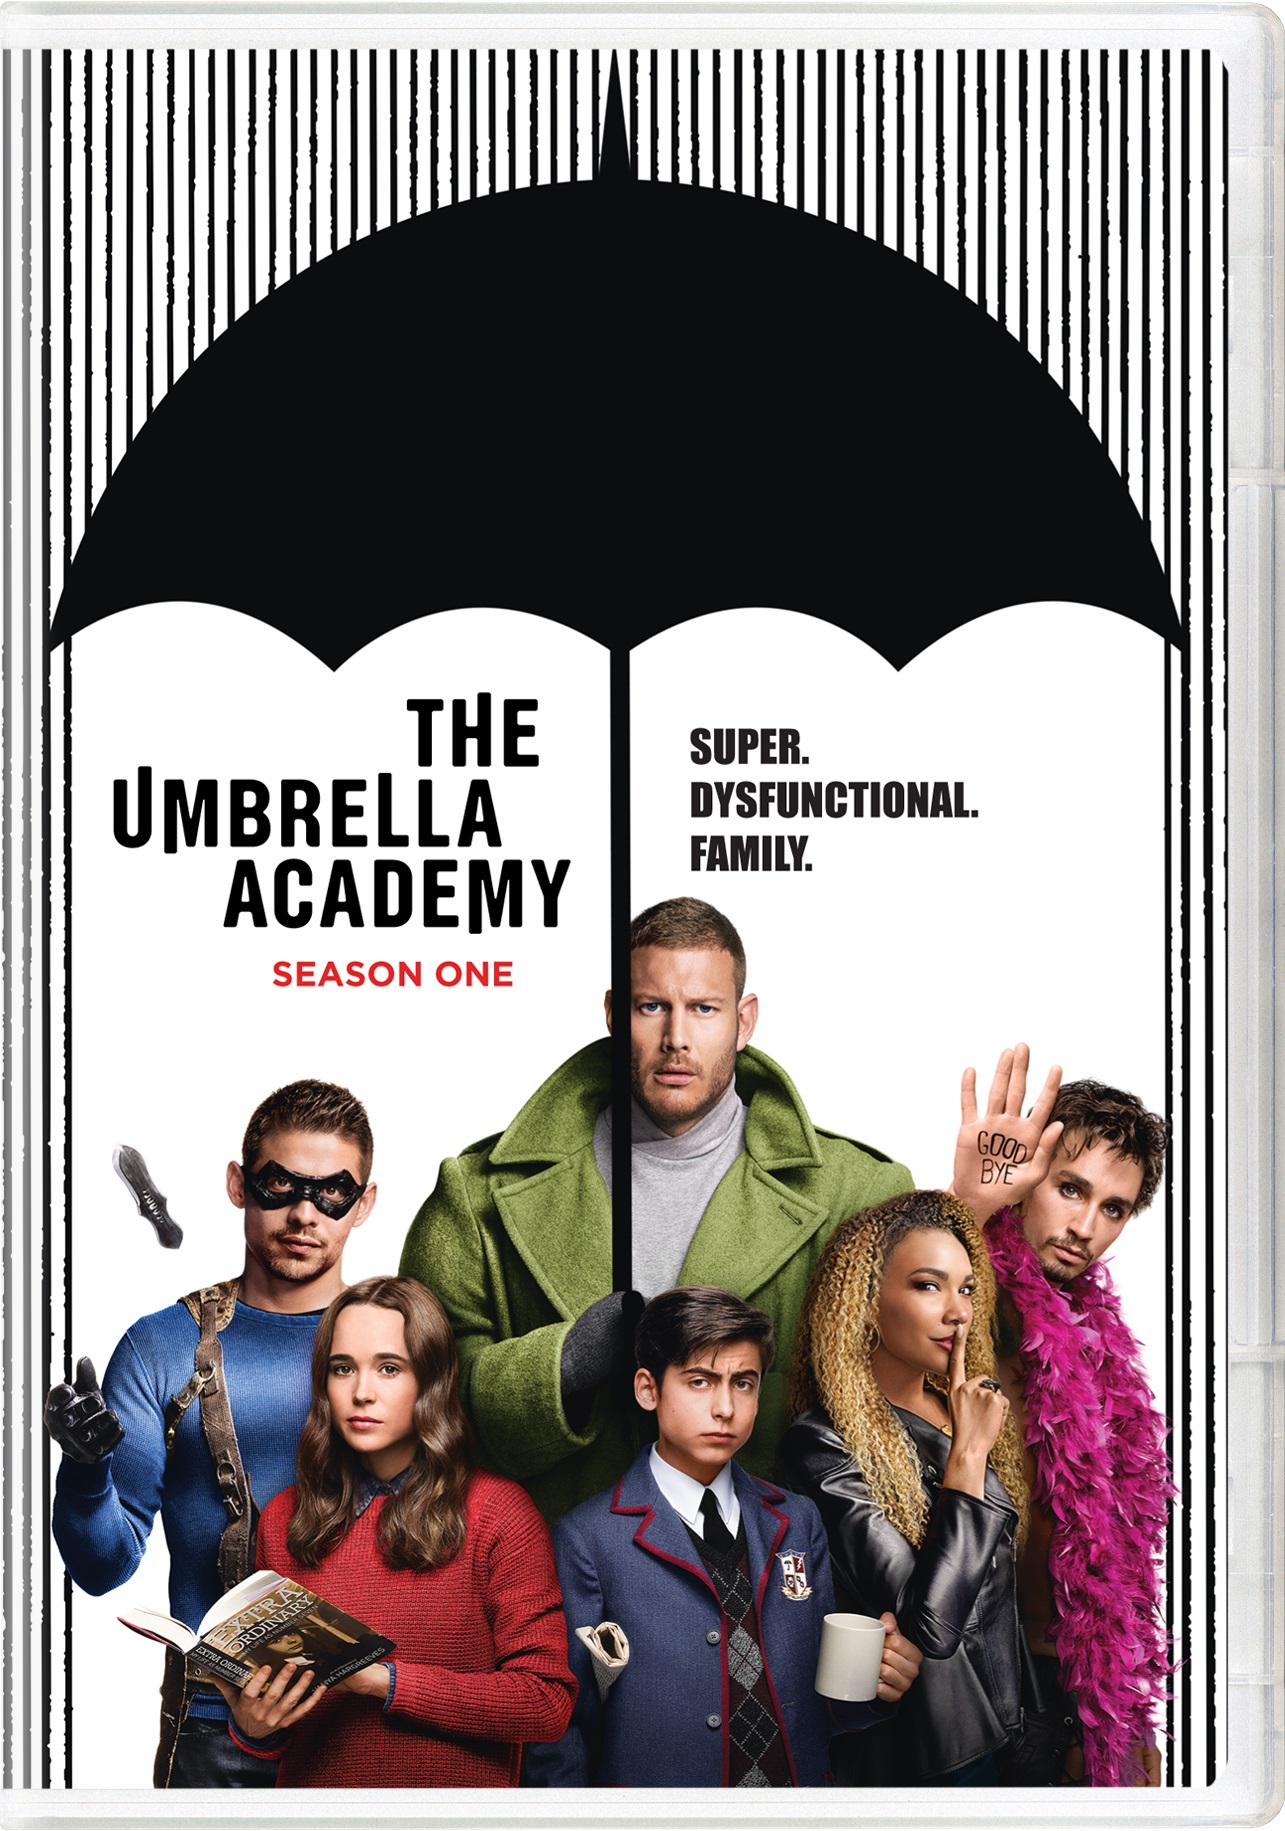 The Umbrella Academy: Season One - DVD [ 2019 ]  - Sci Fi Television On DVD - TV Shows On GRUV